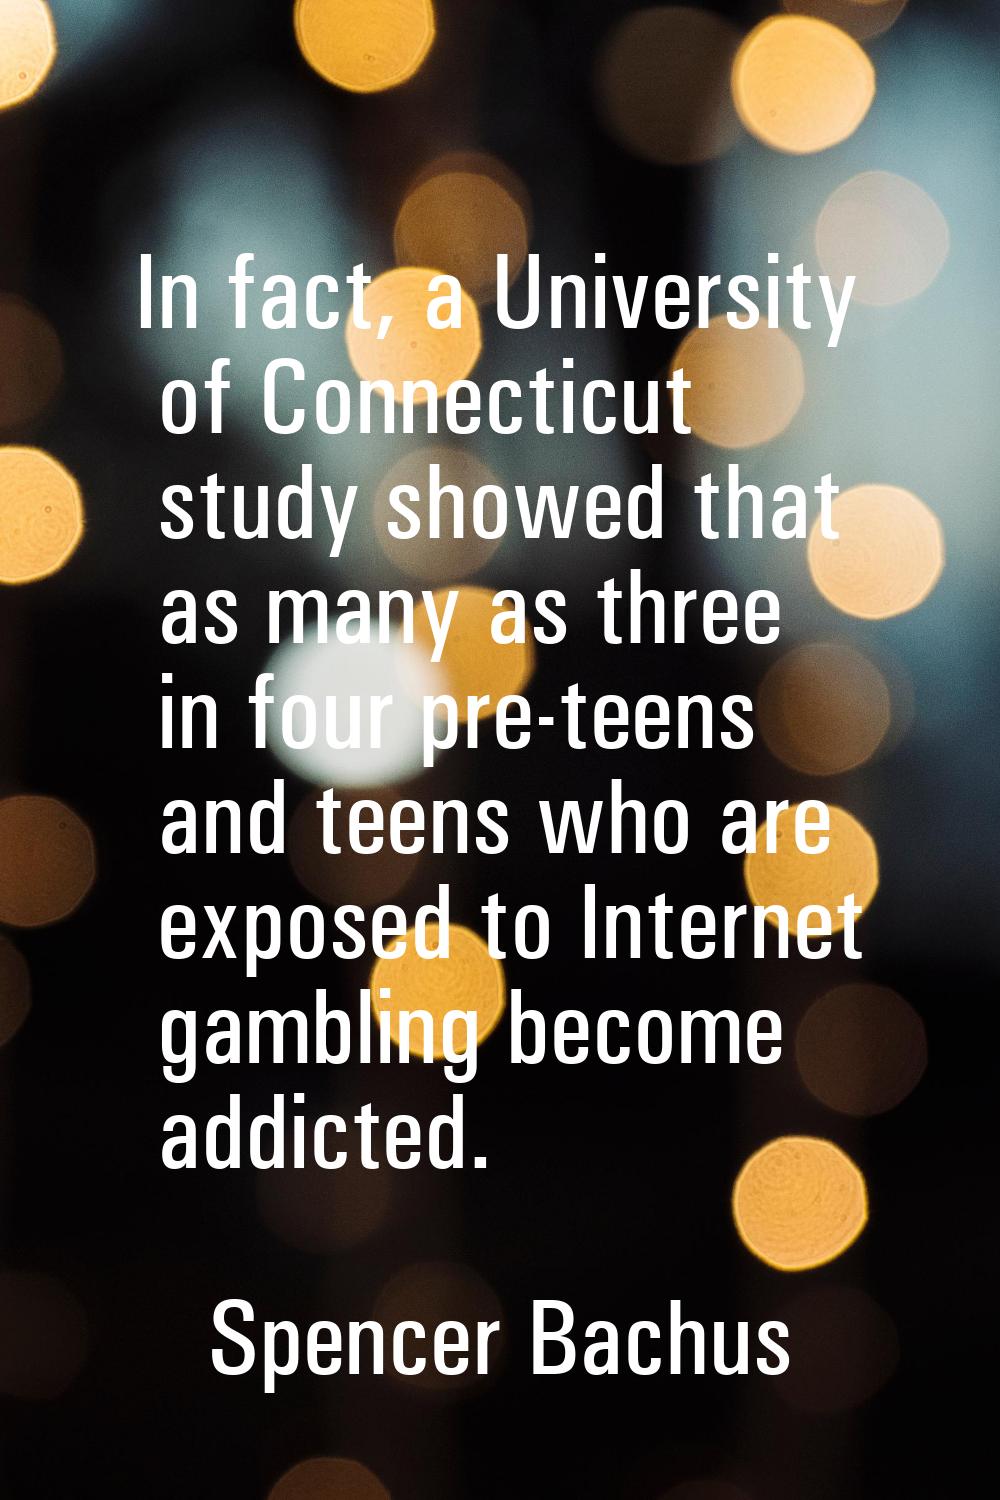 In fact, a University of Connecticut study showed that as many as three in four pre-teens and teens